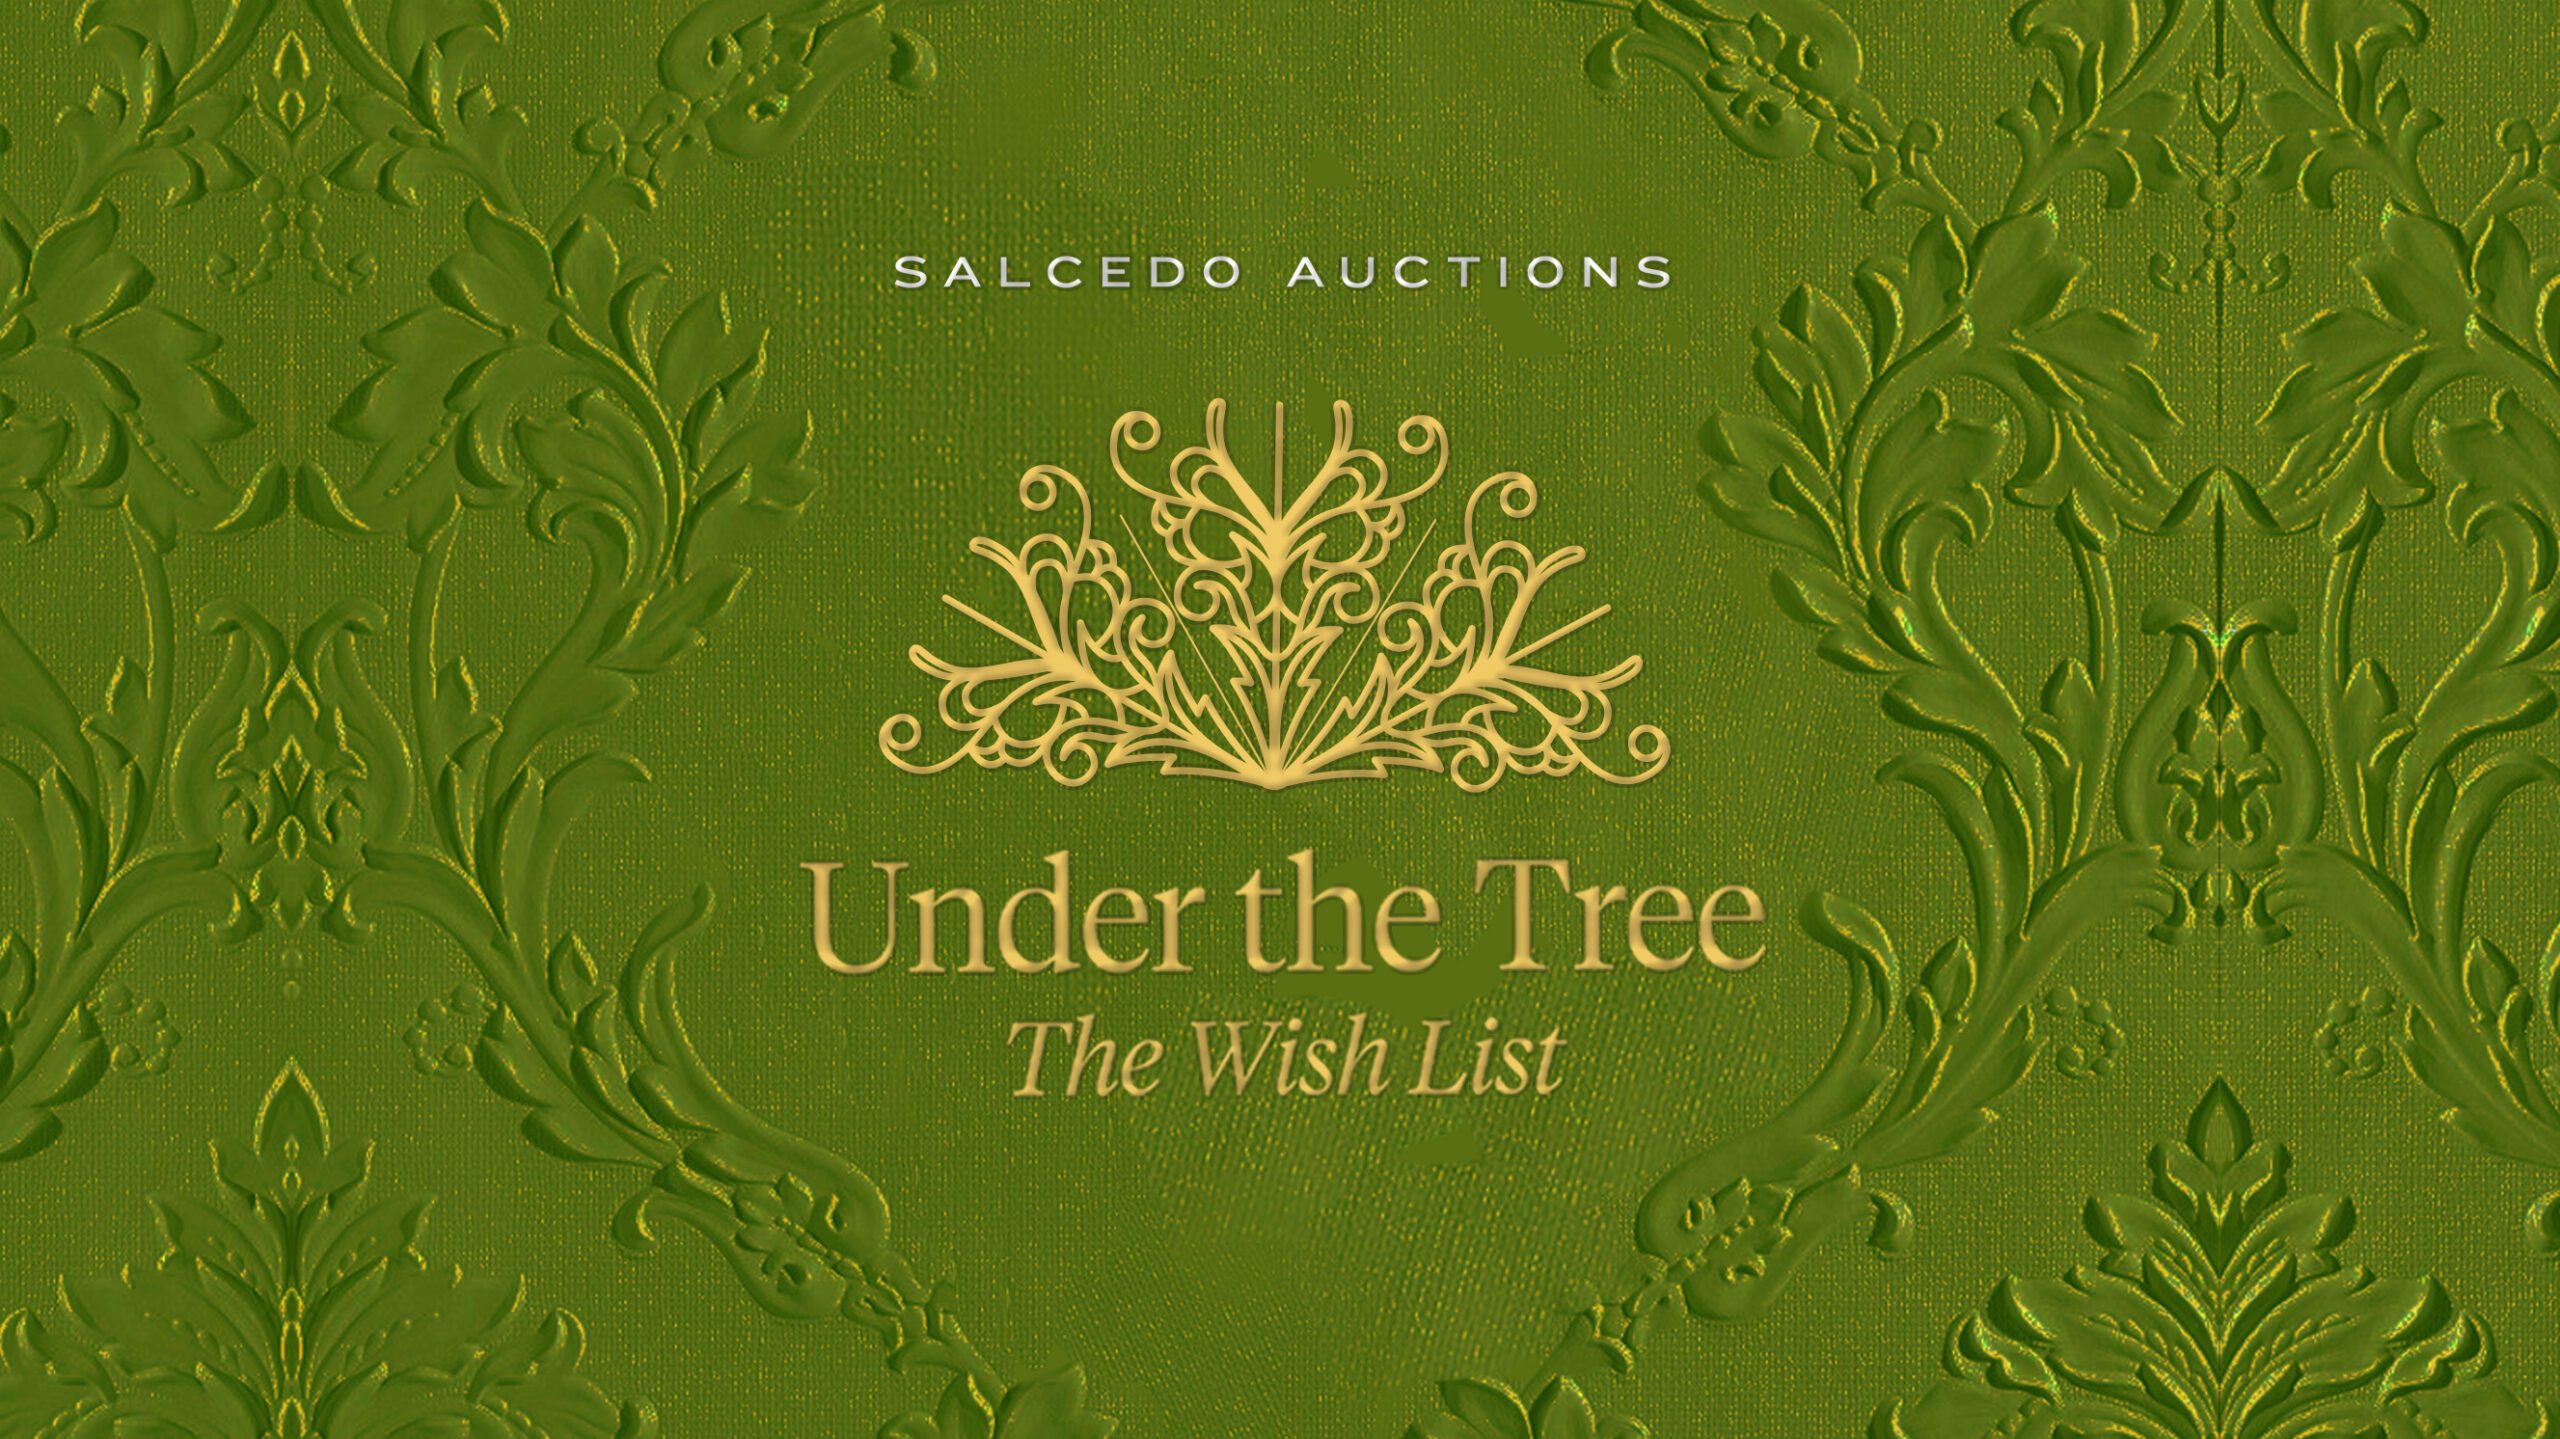 Under the Tree: The Wish List